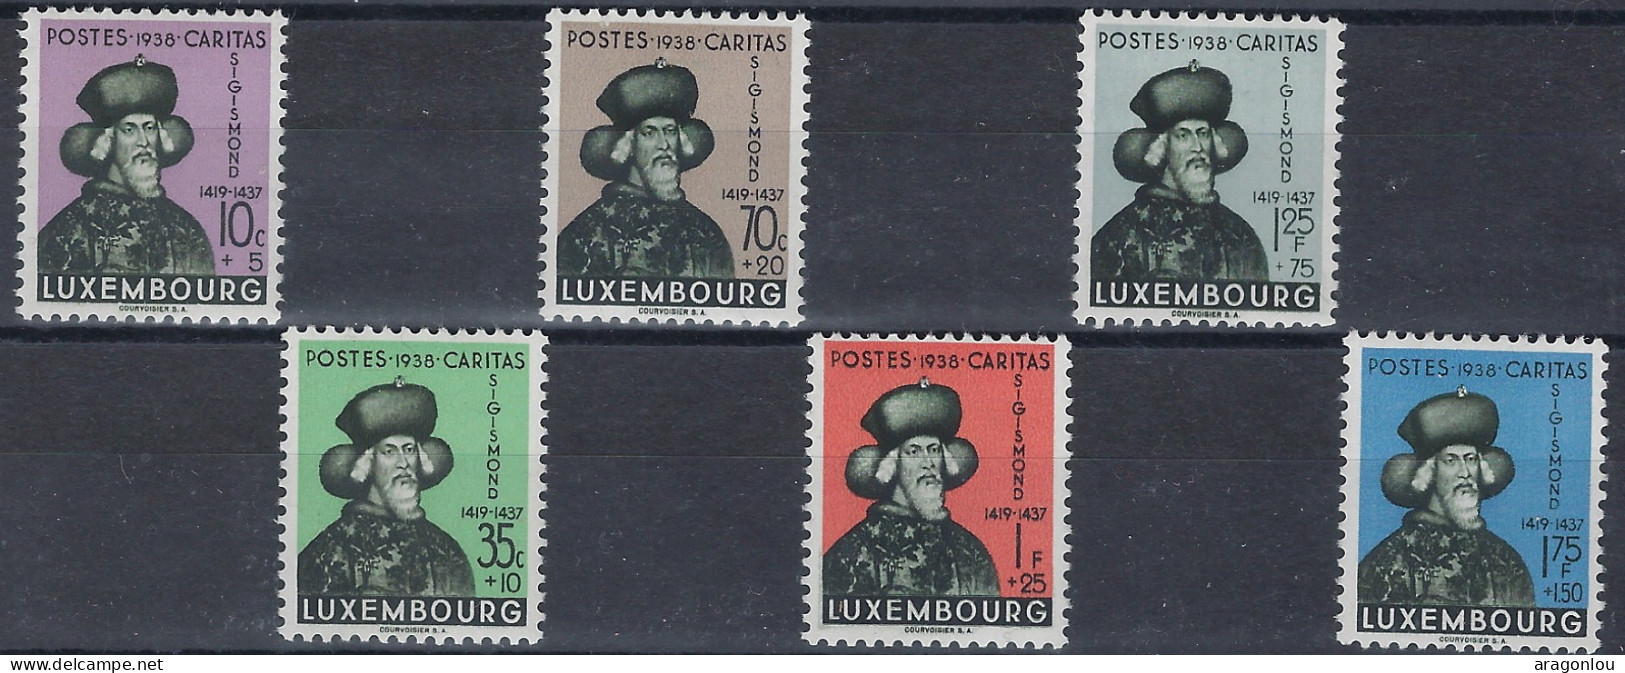 Luxembourg - Luxemburg - Timbres - Sigismund  1938  Série  * - Used Stamps